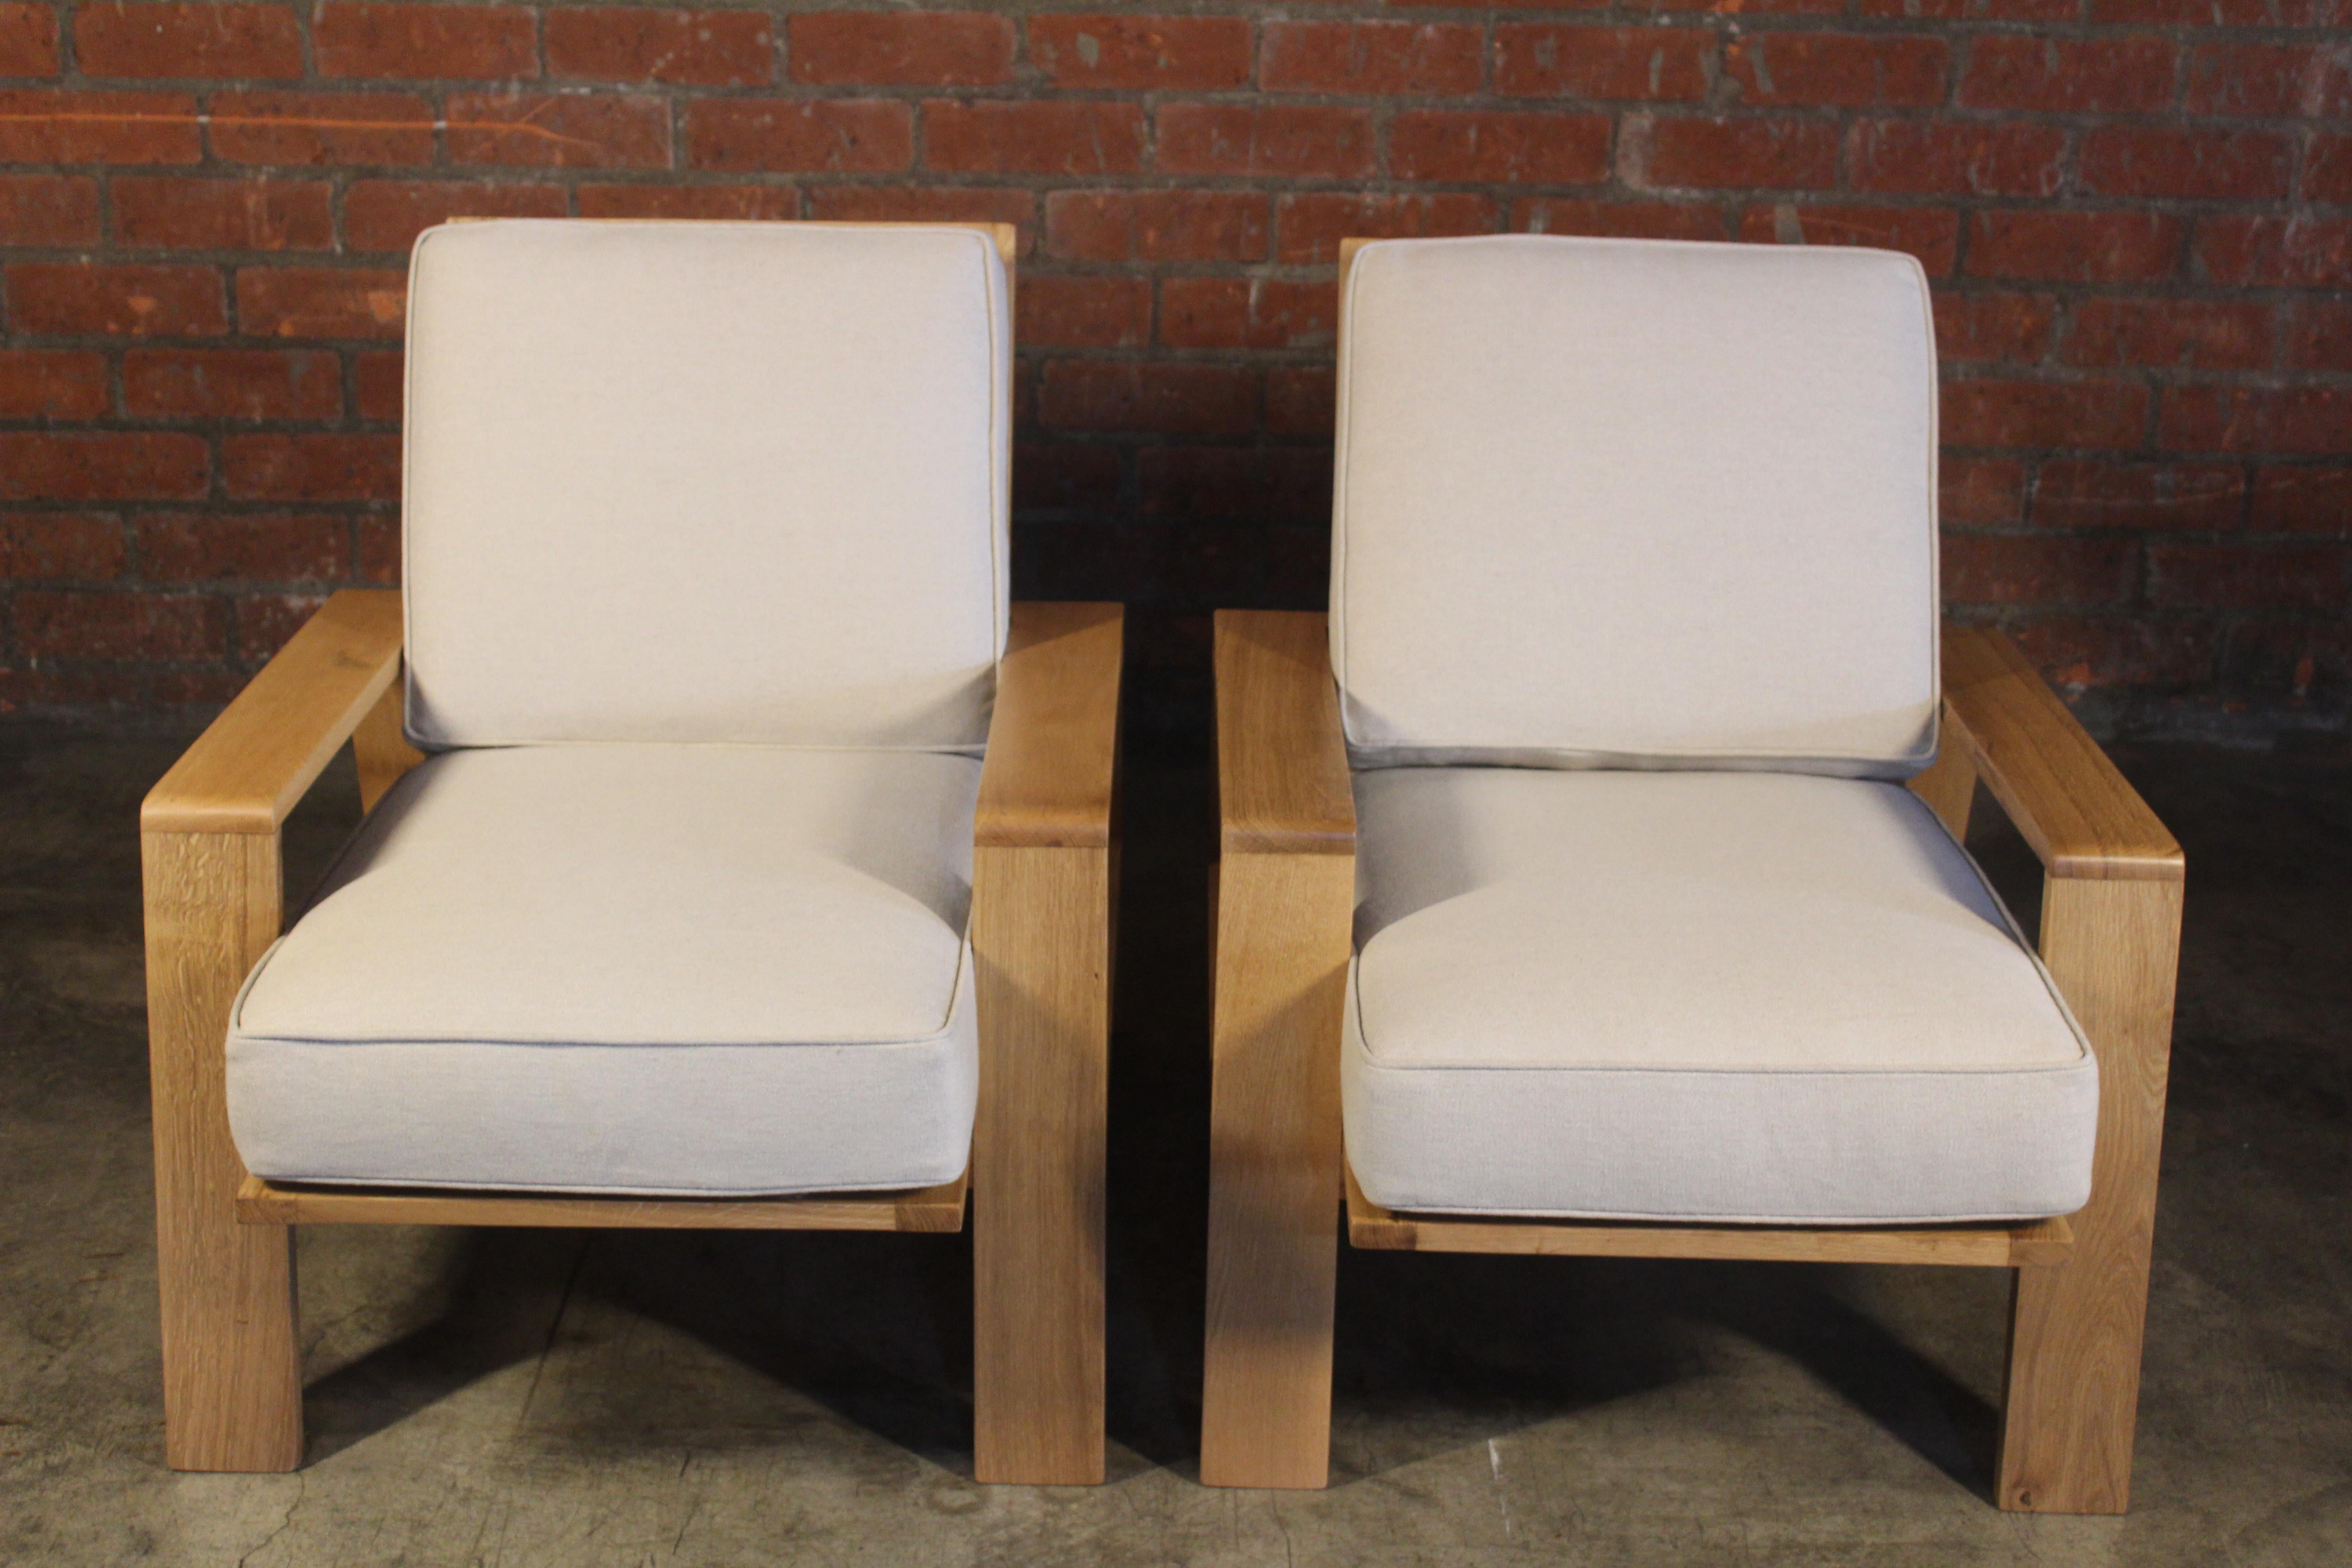 wooden armchairs with cushions